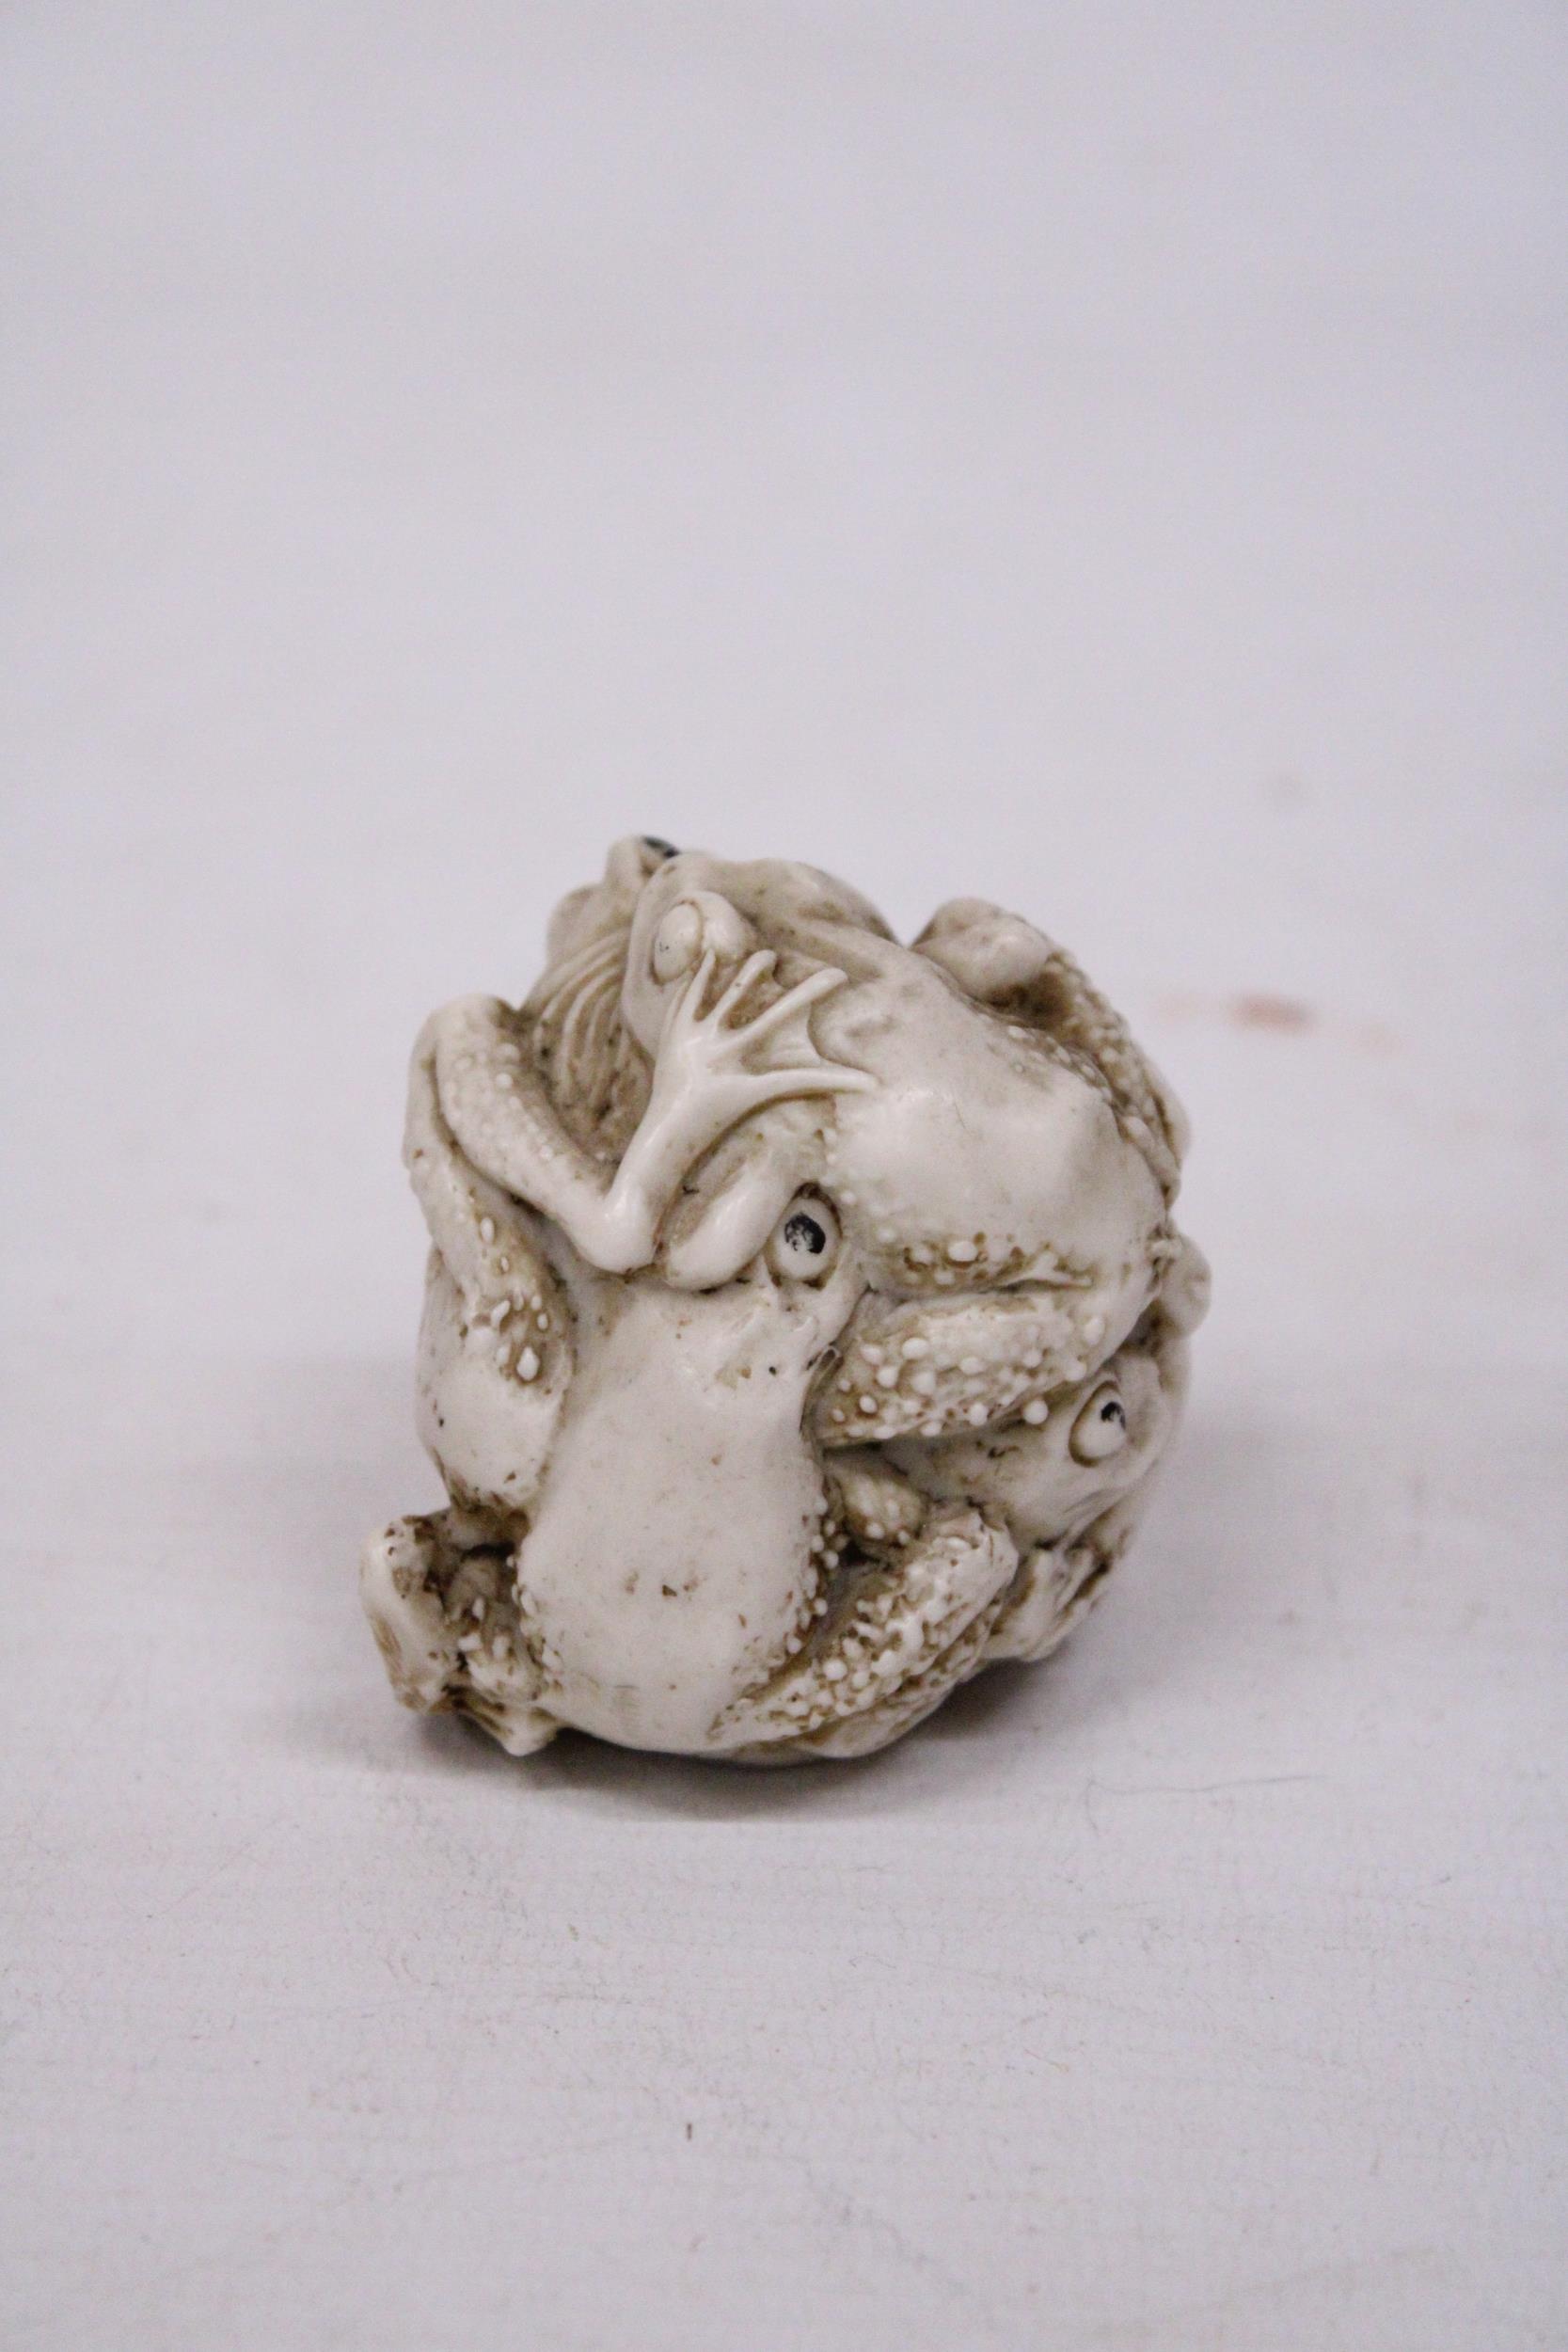 A HAND CARVED ORIENTAL FROG ORNAMENT - Image 3 of 6